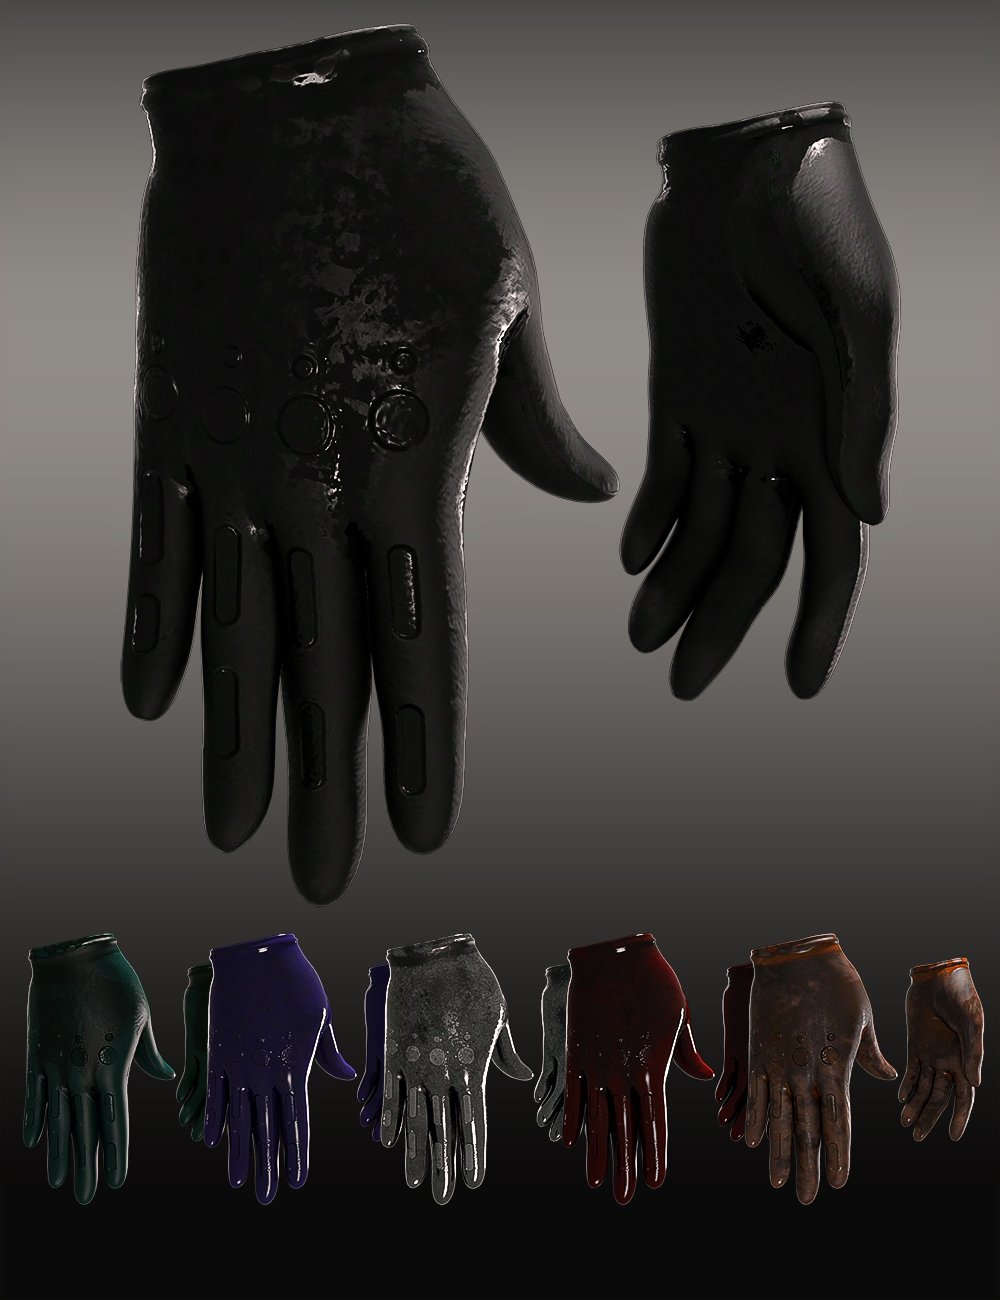 Sci-fi Rebel Rider Outfit Boots and Gloves for Genesis 8.1 Female by: Yura, 3D Models by Daz 3D